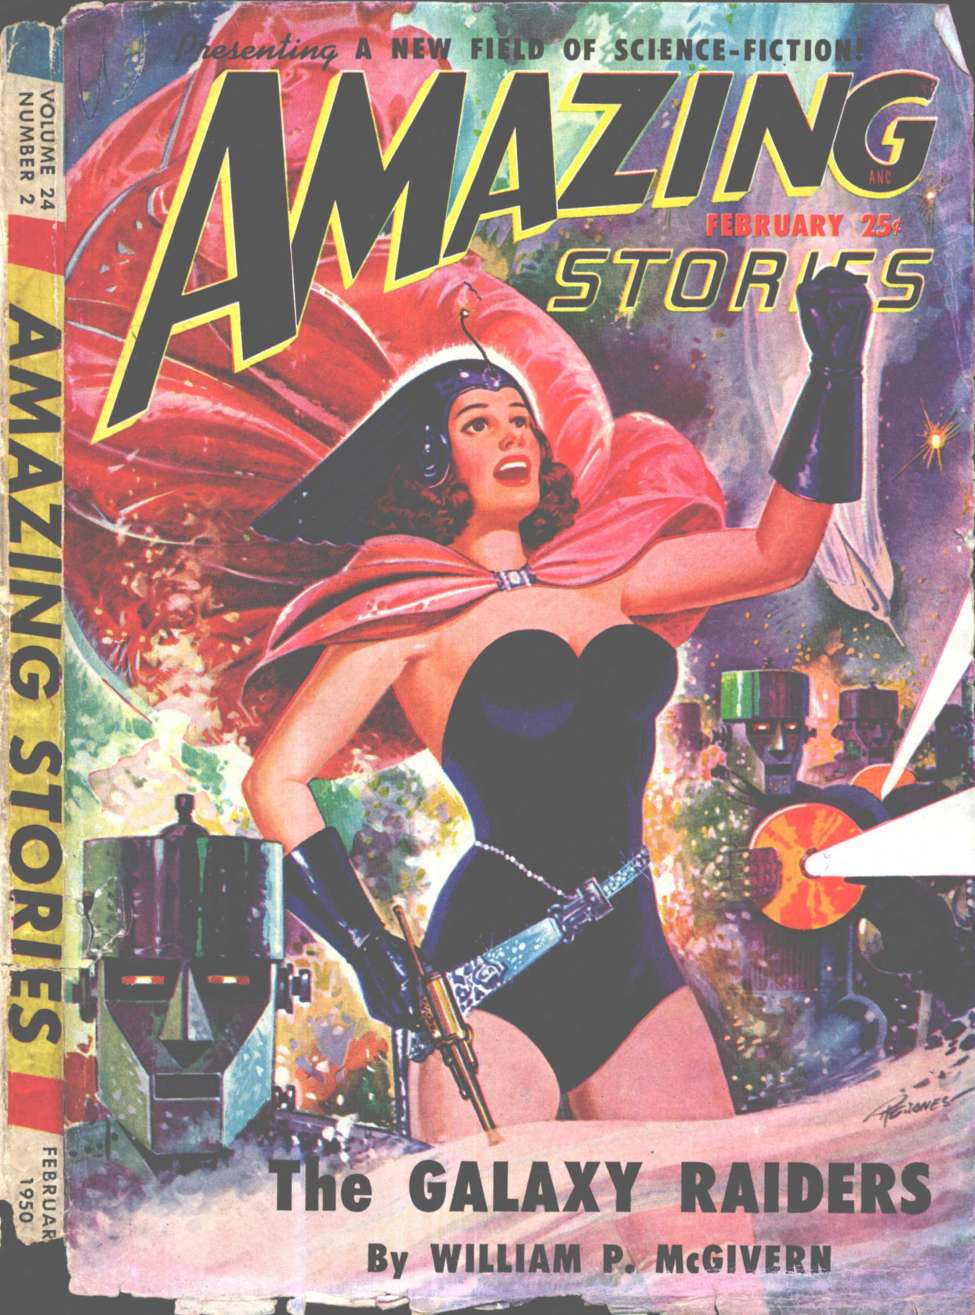 Comic Book Cover For Amazing Stories v24 2 - The Galaxy Raiders - William P. McGivern